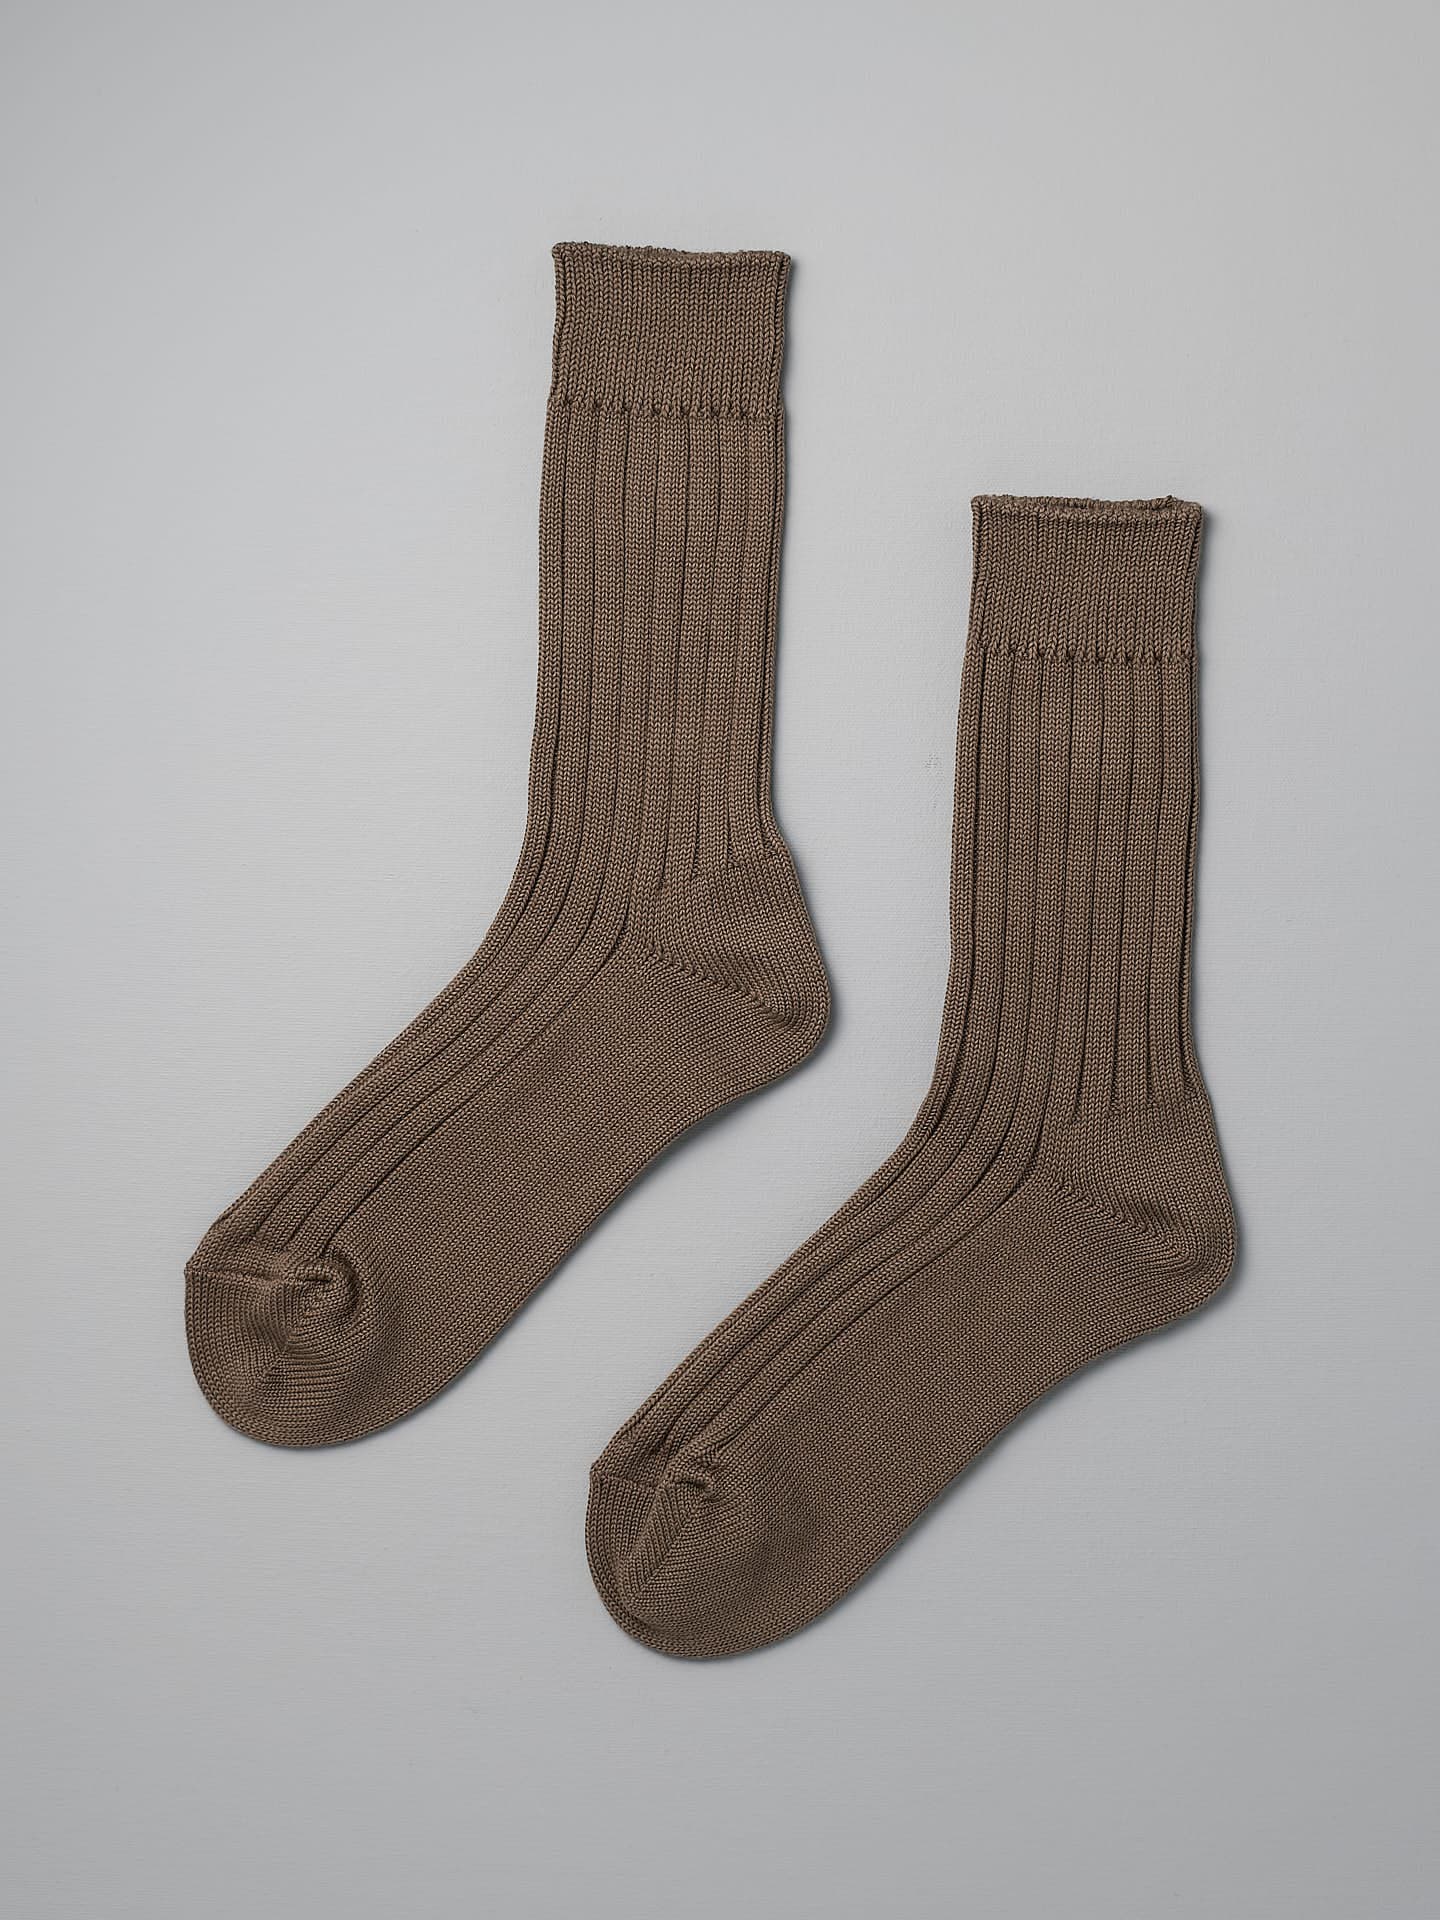 A pair of Praha Cotton Socks – Chocolate Milk by Nishiguchi Kutsushita laid flat on a light grey background, perfect to complement both men's and women's shoes. Check the size guide for the best fit across EUR and US sizes.